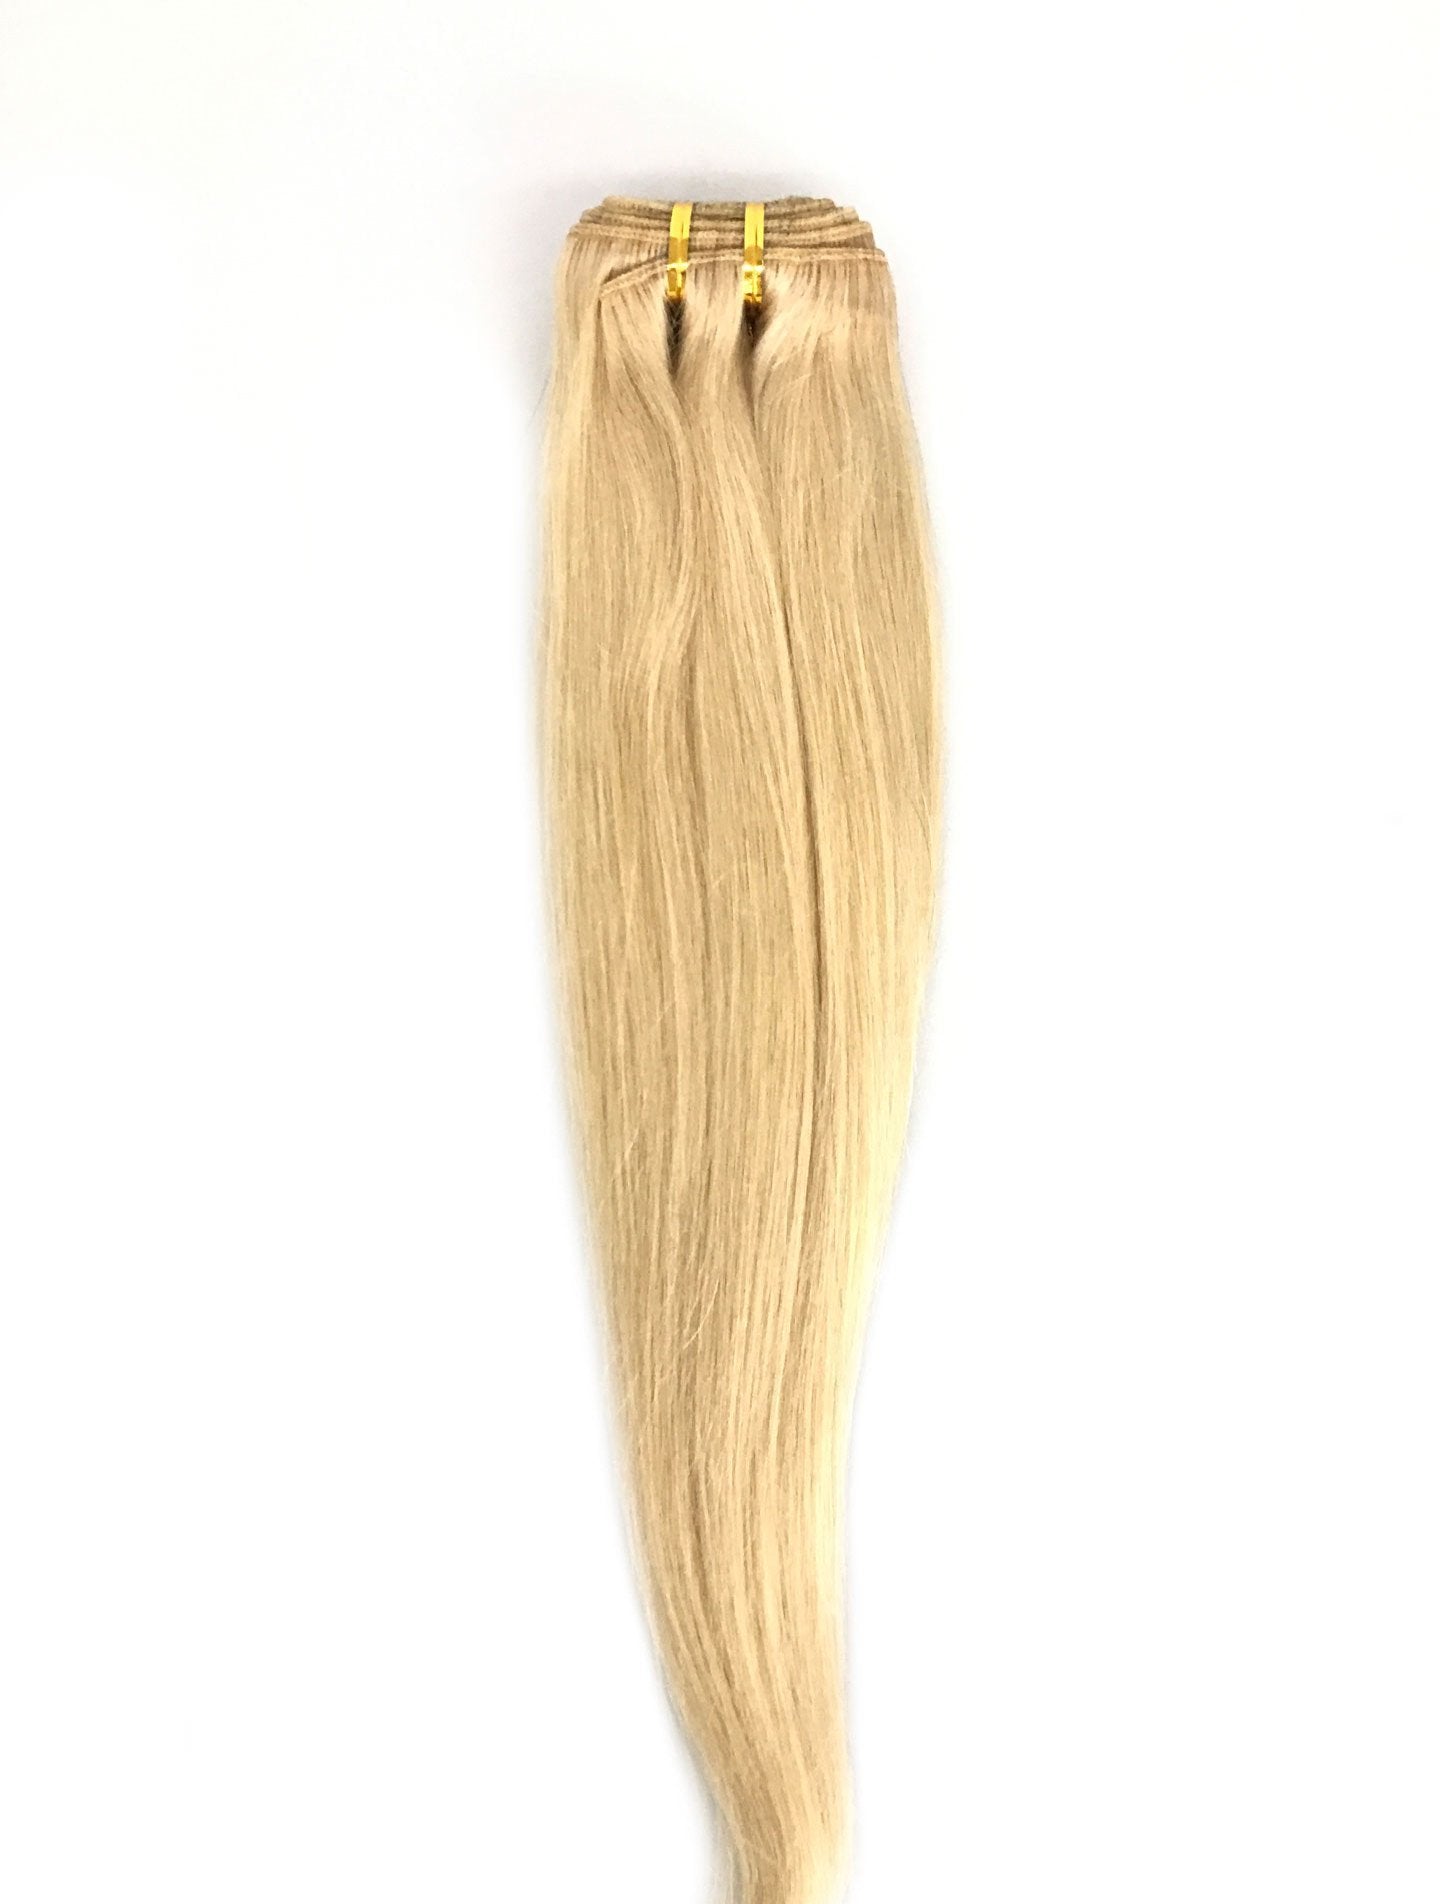 9A Malaysian Straight Human Hair Extension Platinum Blonde - eHair Outlet